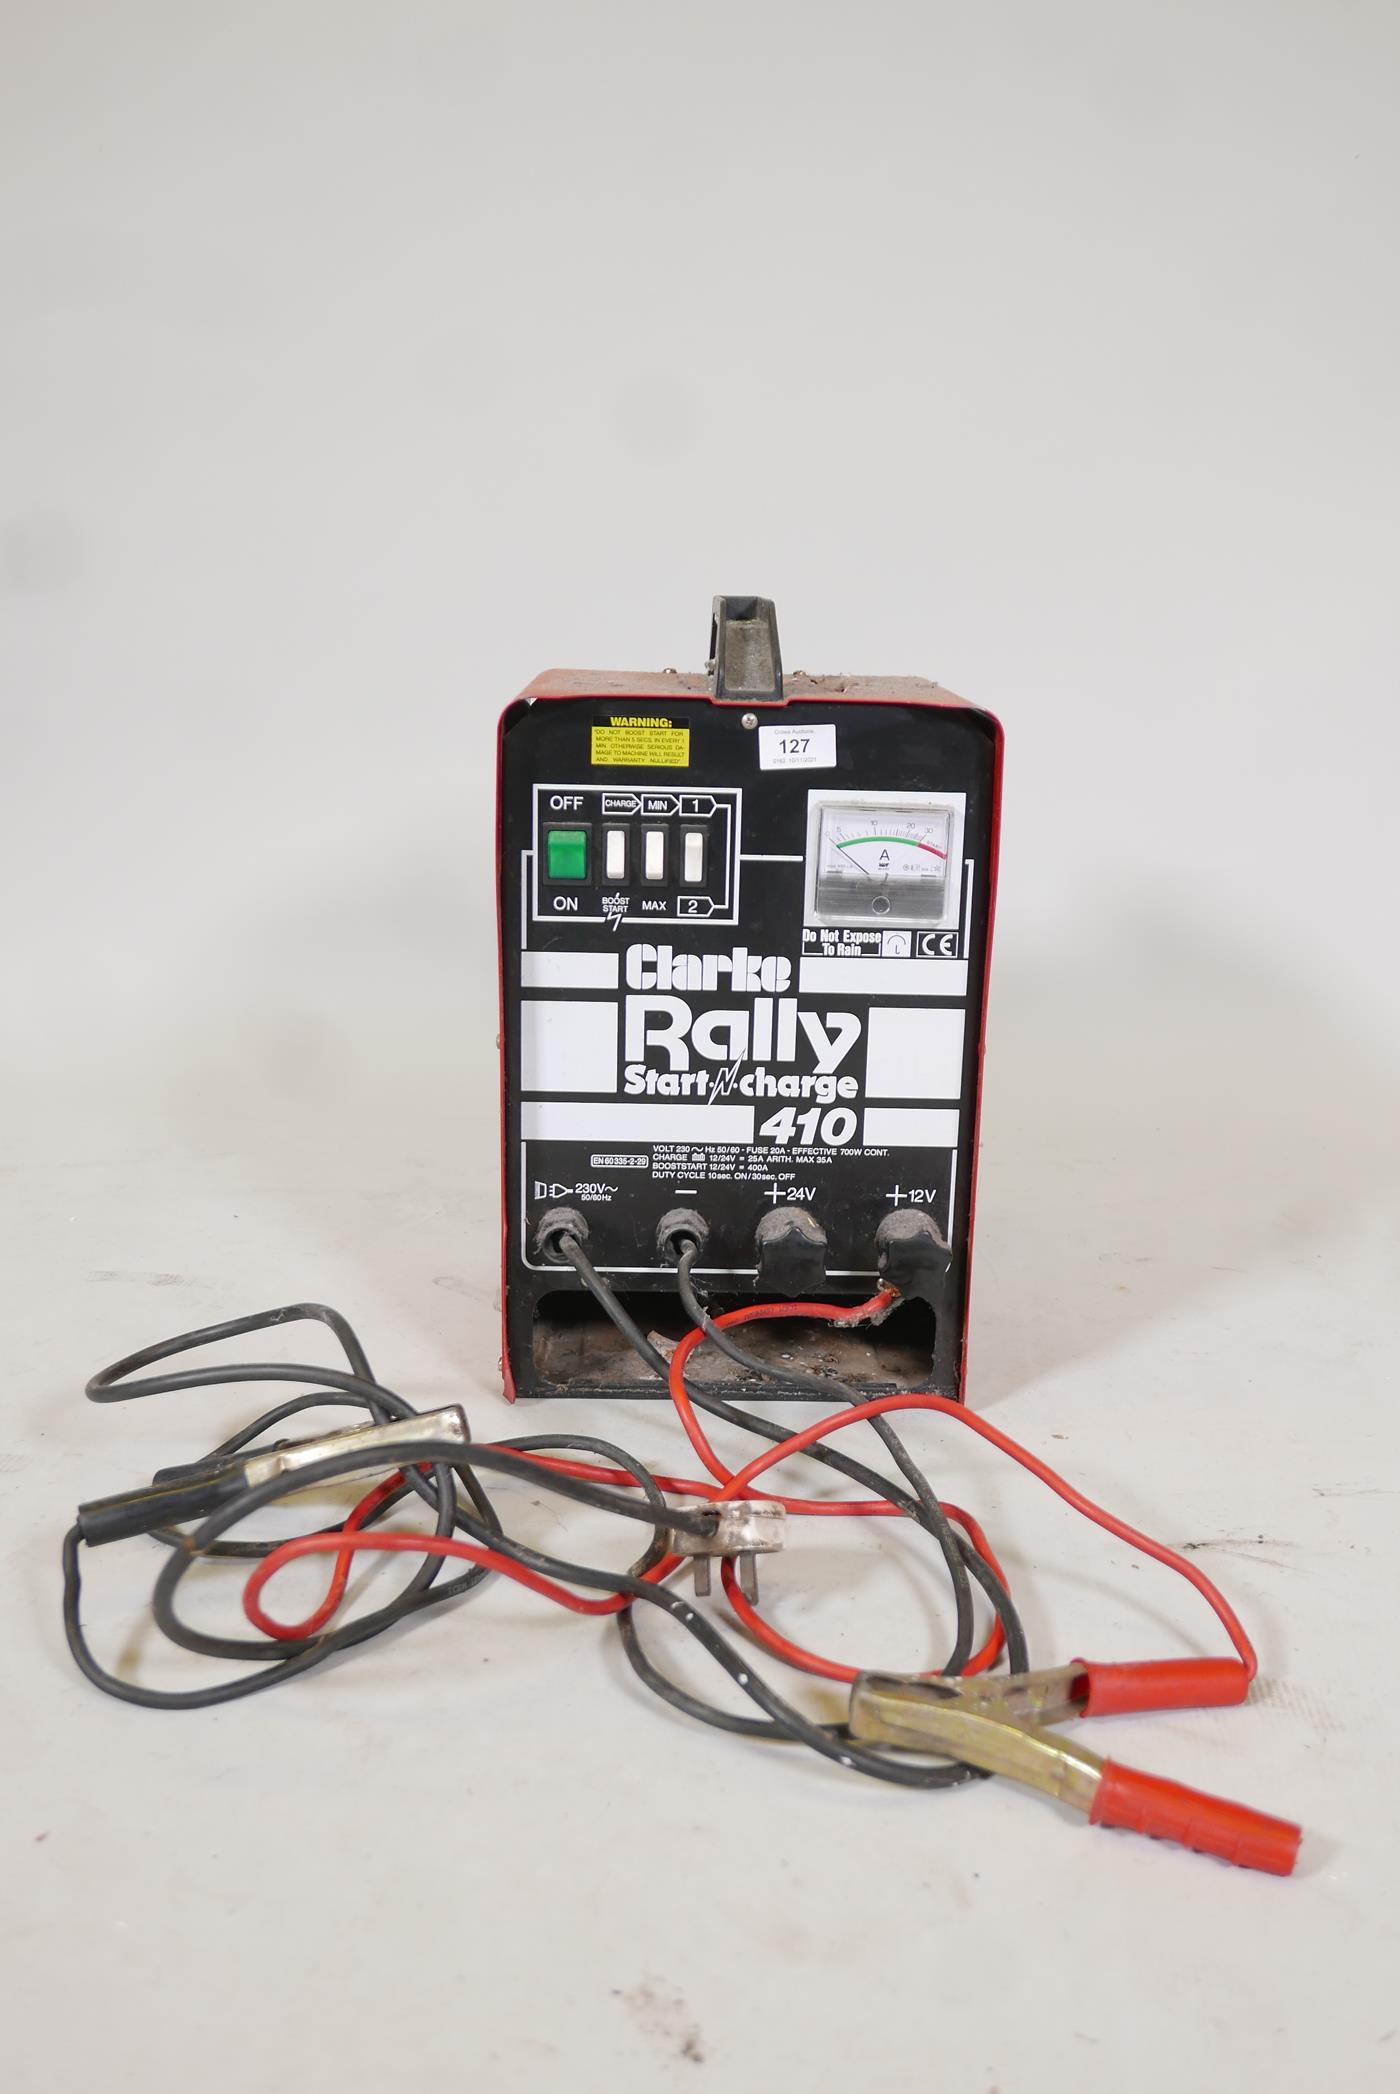 A clarke Rally smart/charge 410 battery charger/jump starter